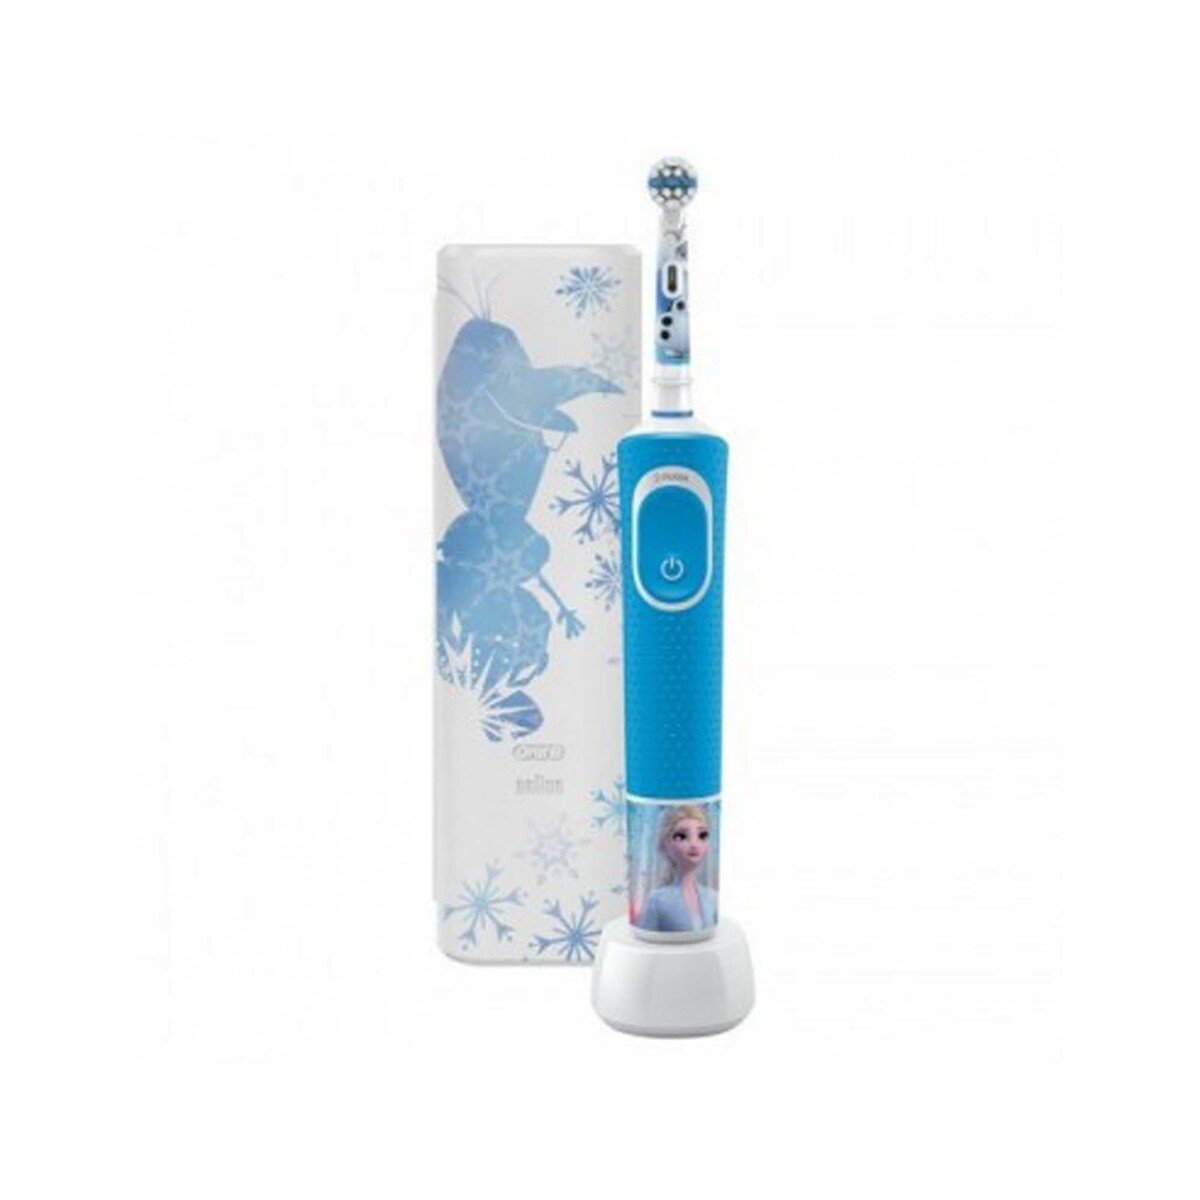 Oral-B D100 Vitality Rechargeable Kids Toothbrush With Travel Case D100.414 2K-Frozen